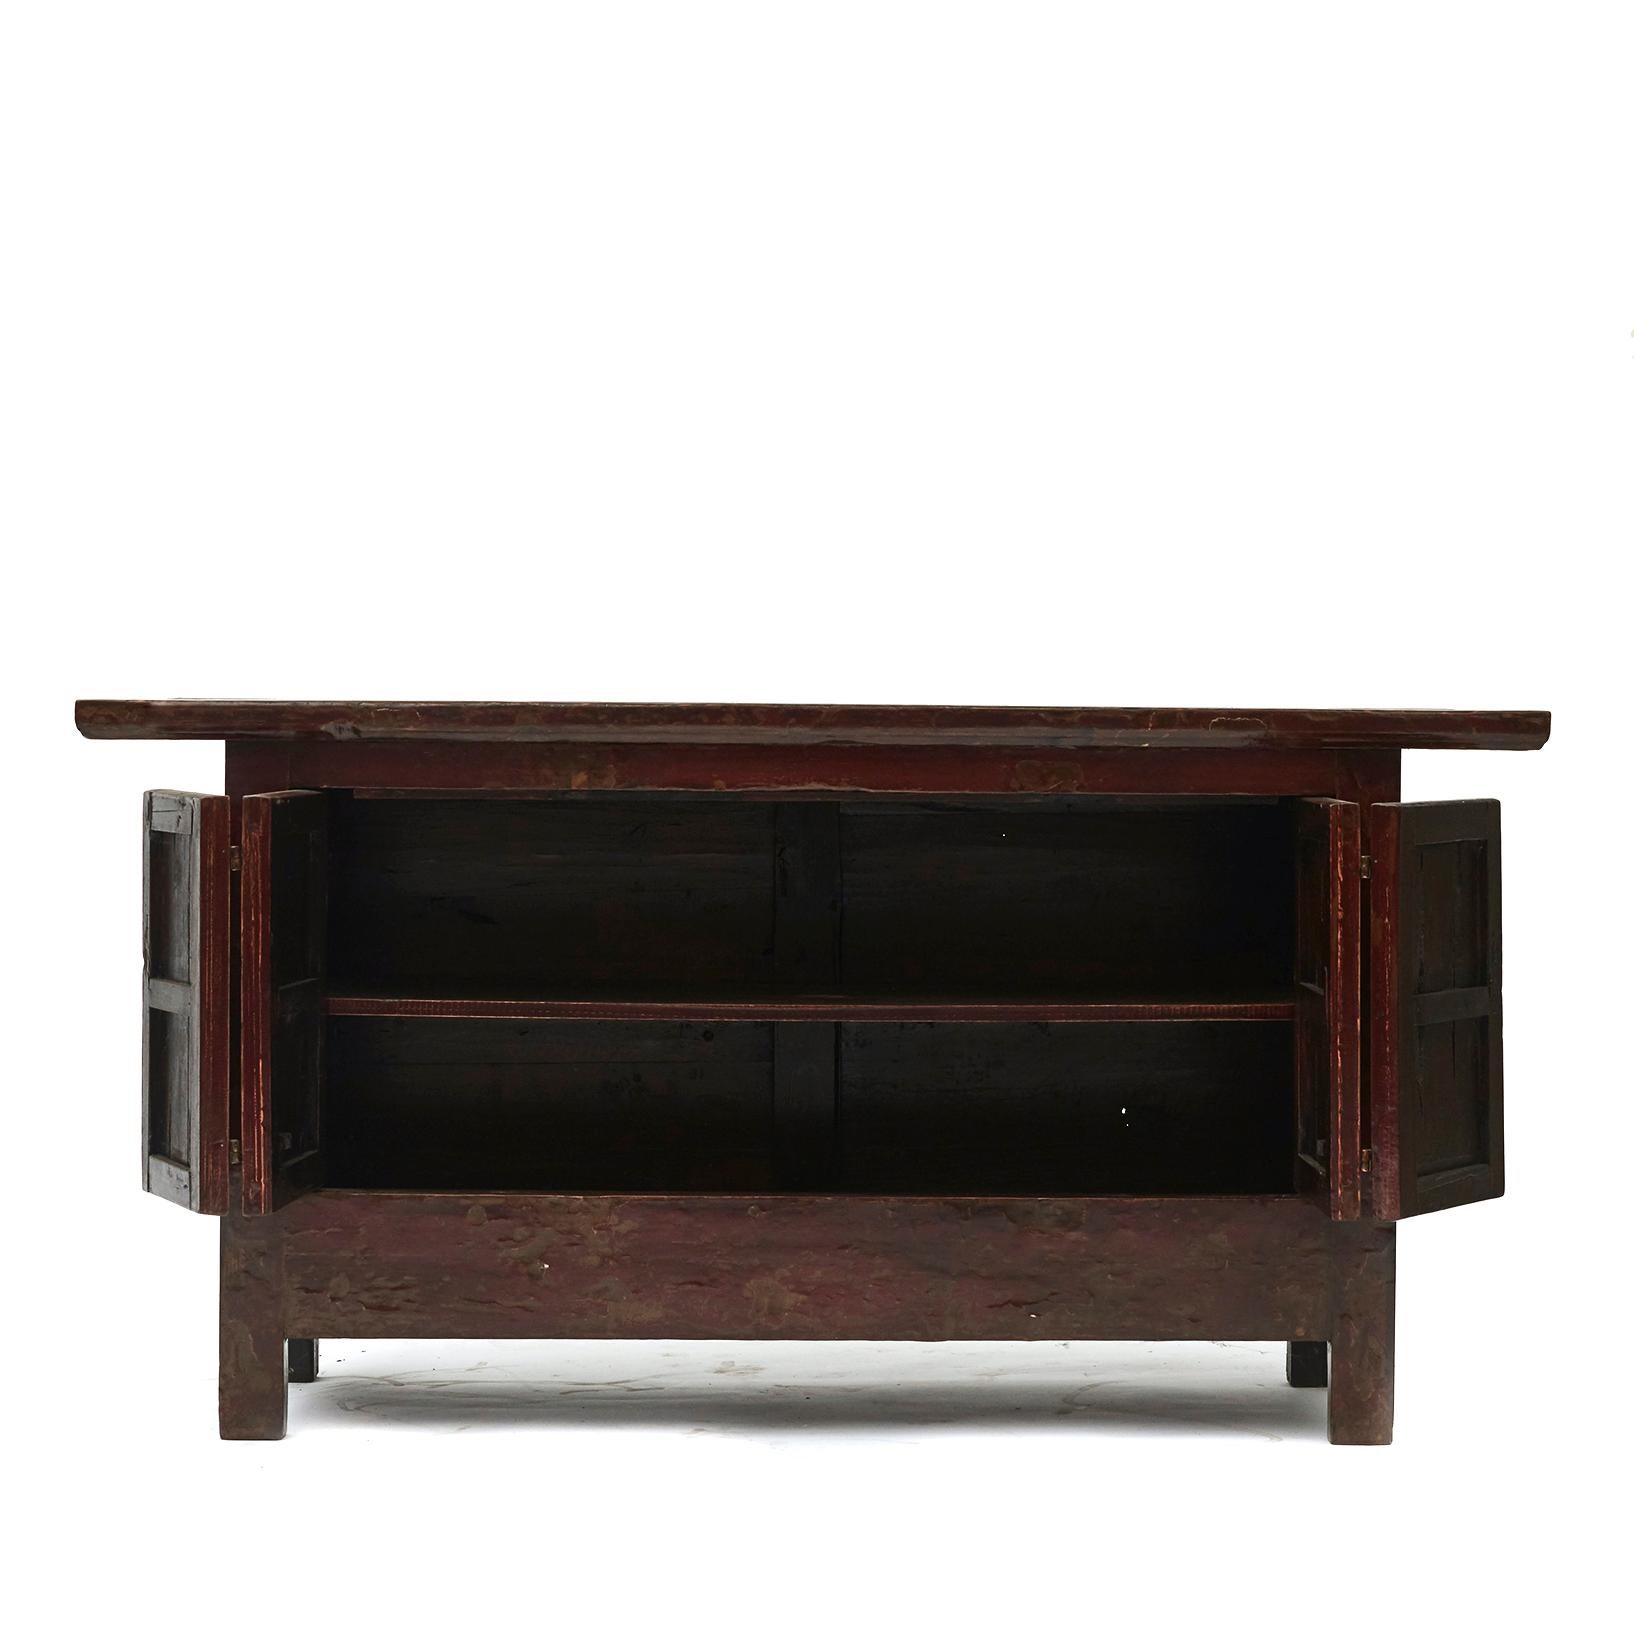 Chinese 19th century sideboard cabinet with orginal lacquer.
Front and top with deep dark red lacquer, sides with black lacquer.

Features double bi-fold doors revealing a storage area with one wood shelf.
The Bi-fold doors are making it easier